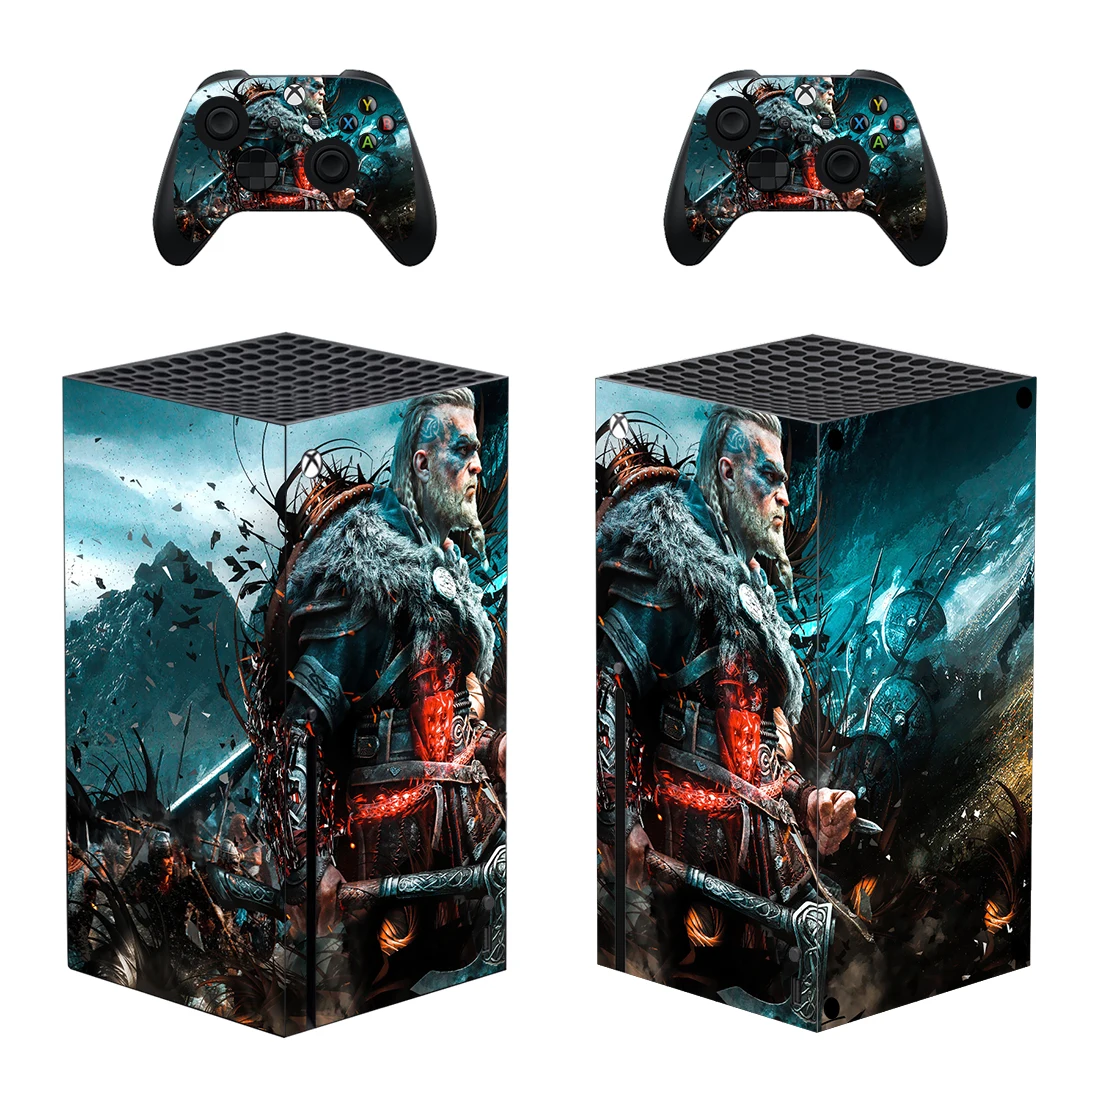 New Game Skin Sticker Decal Cover for Xbox Series X Console and 2 Controllers Xbox Series X Skin Sticker Vinyl